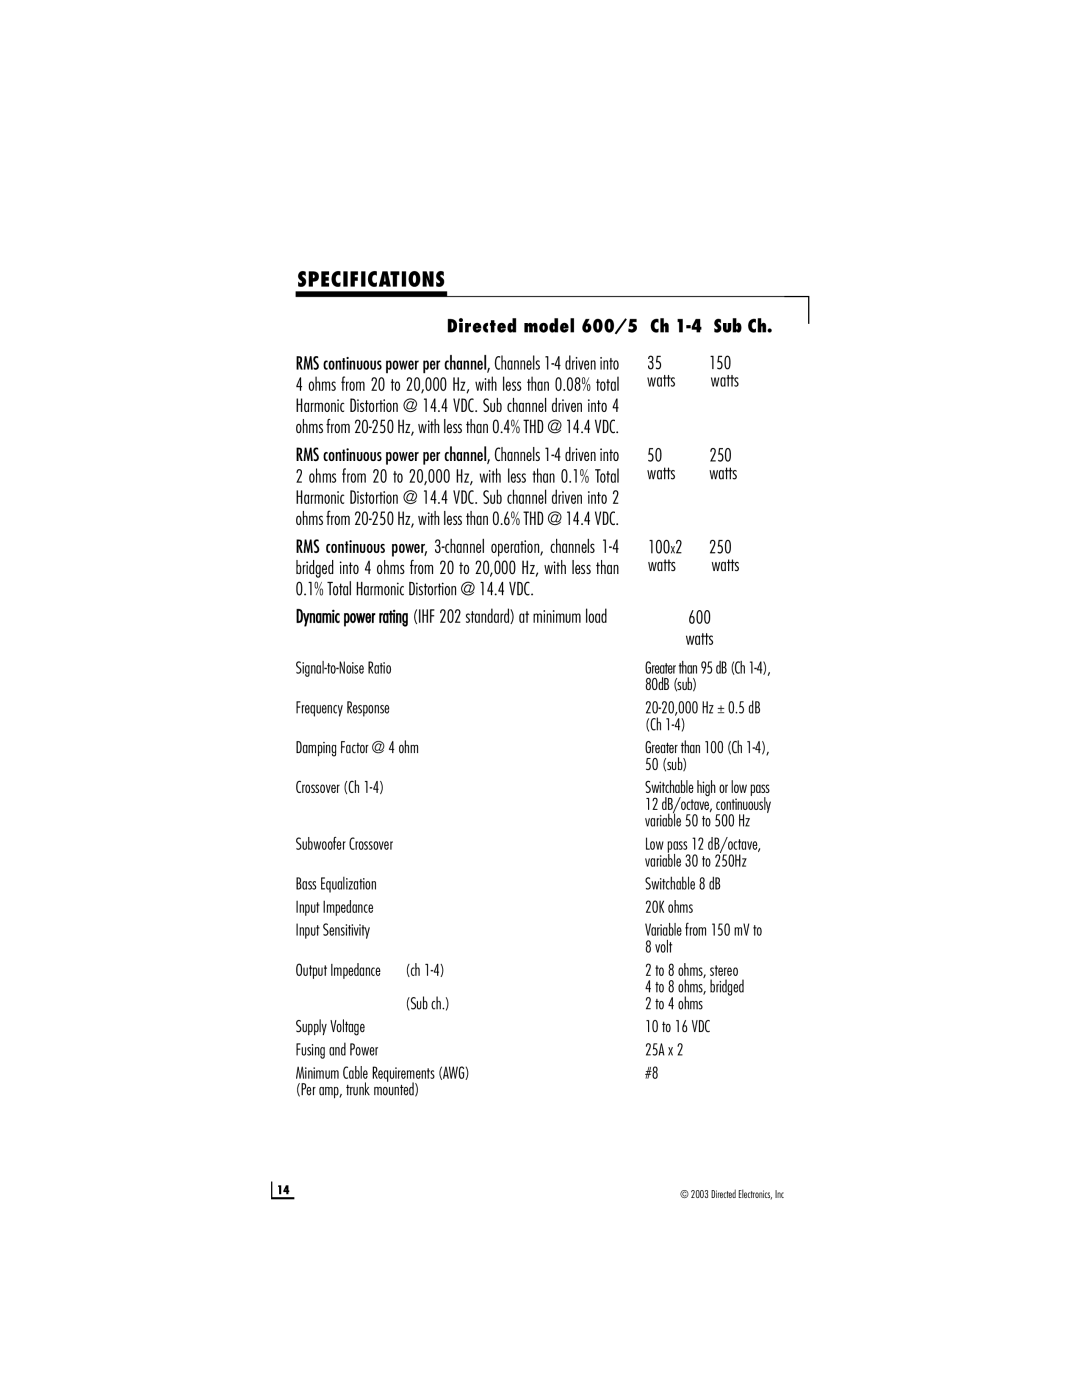 Directed Electronics manual Specifications, Directed model 600/5 Ch 1-4Sub Ch, watts watts 